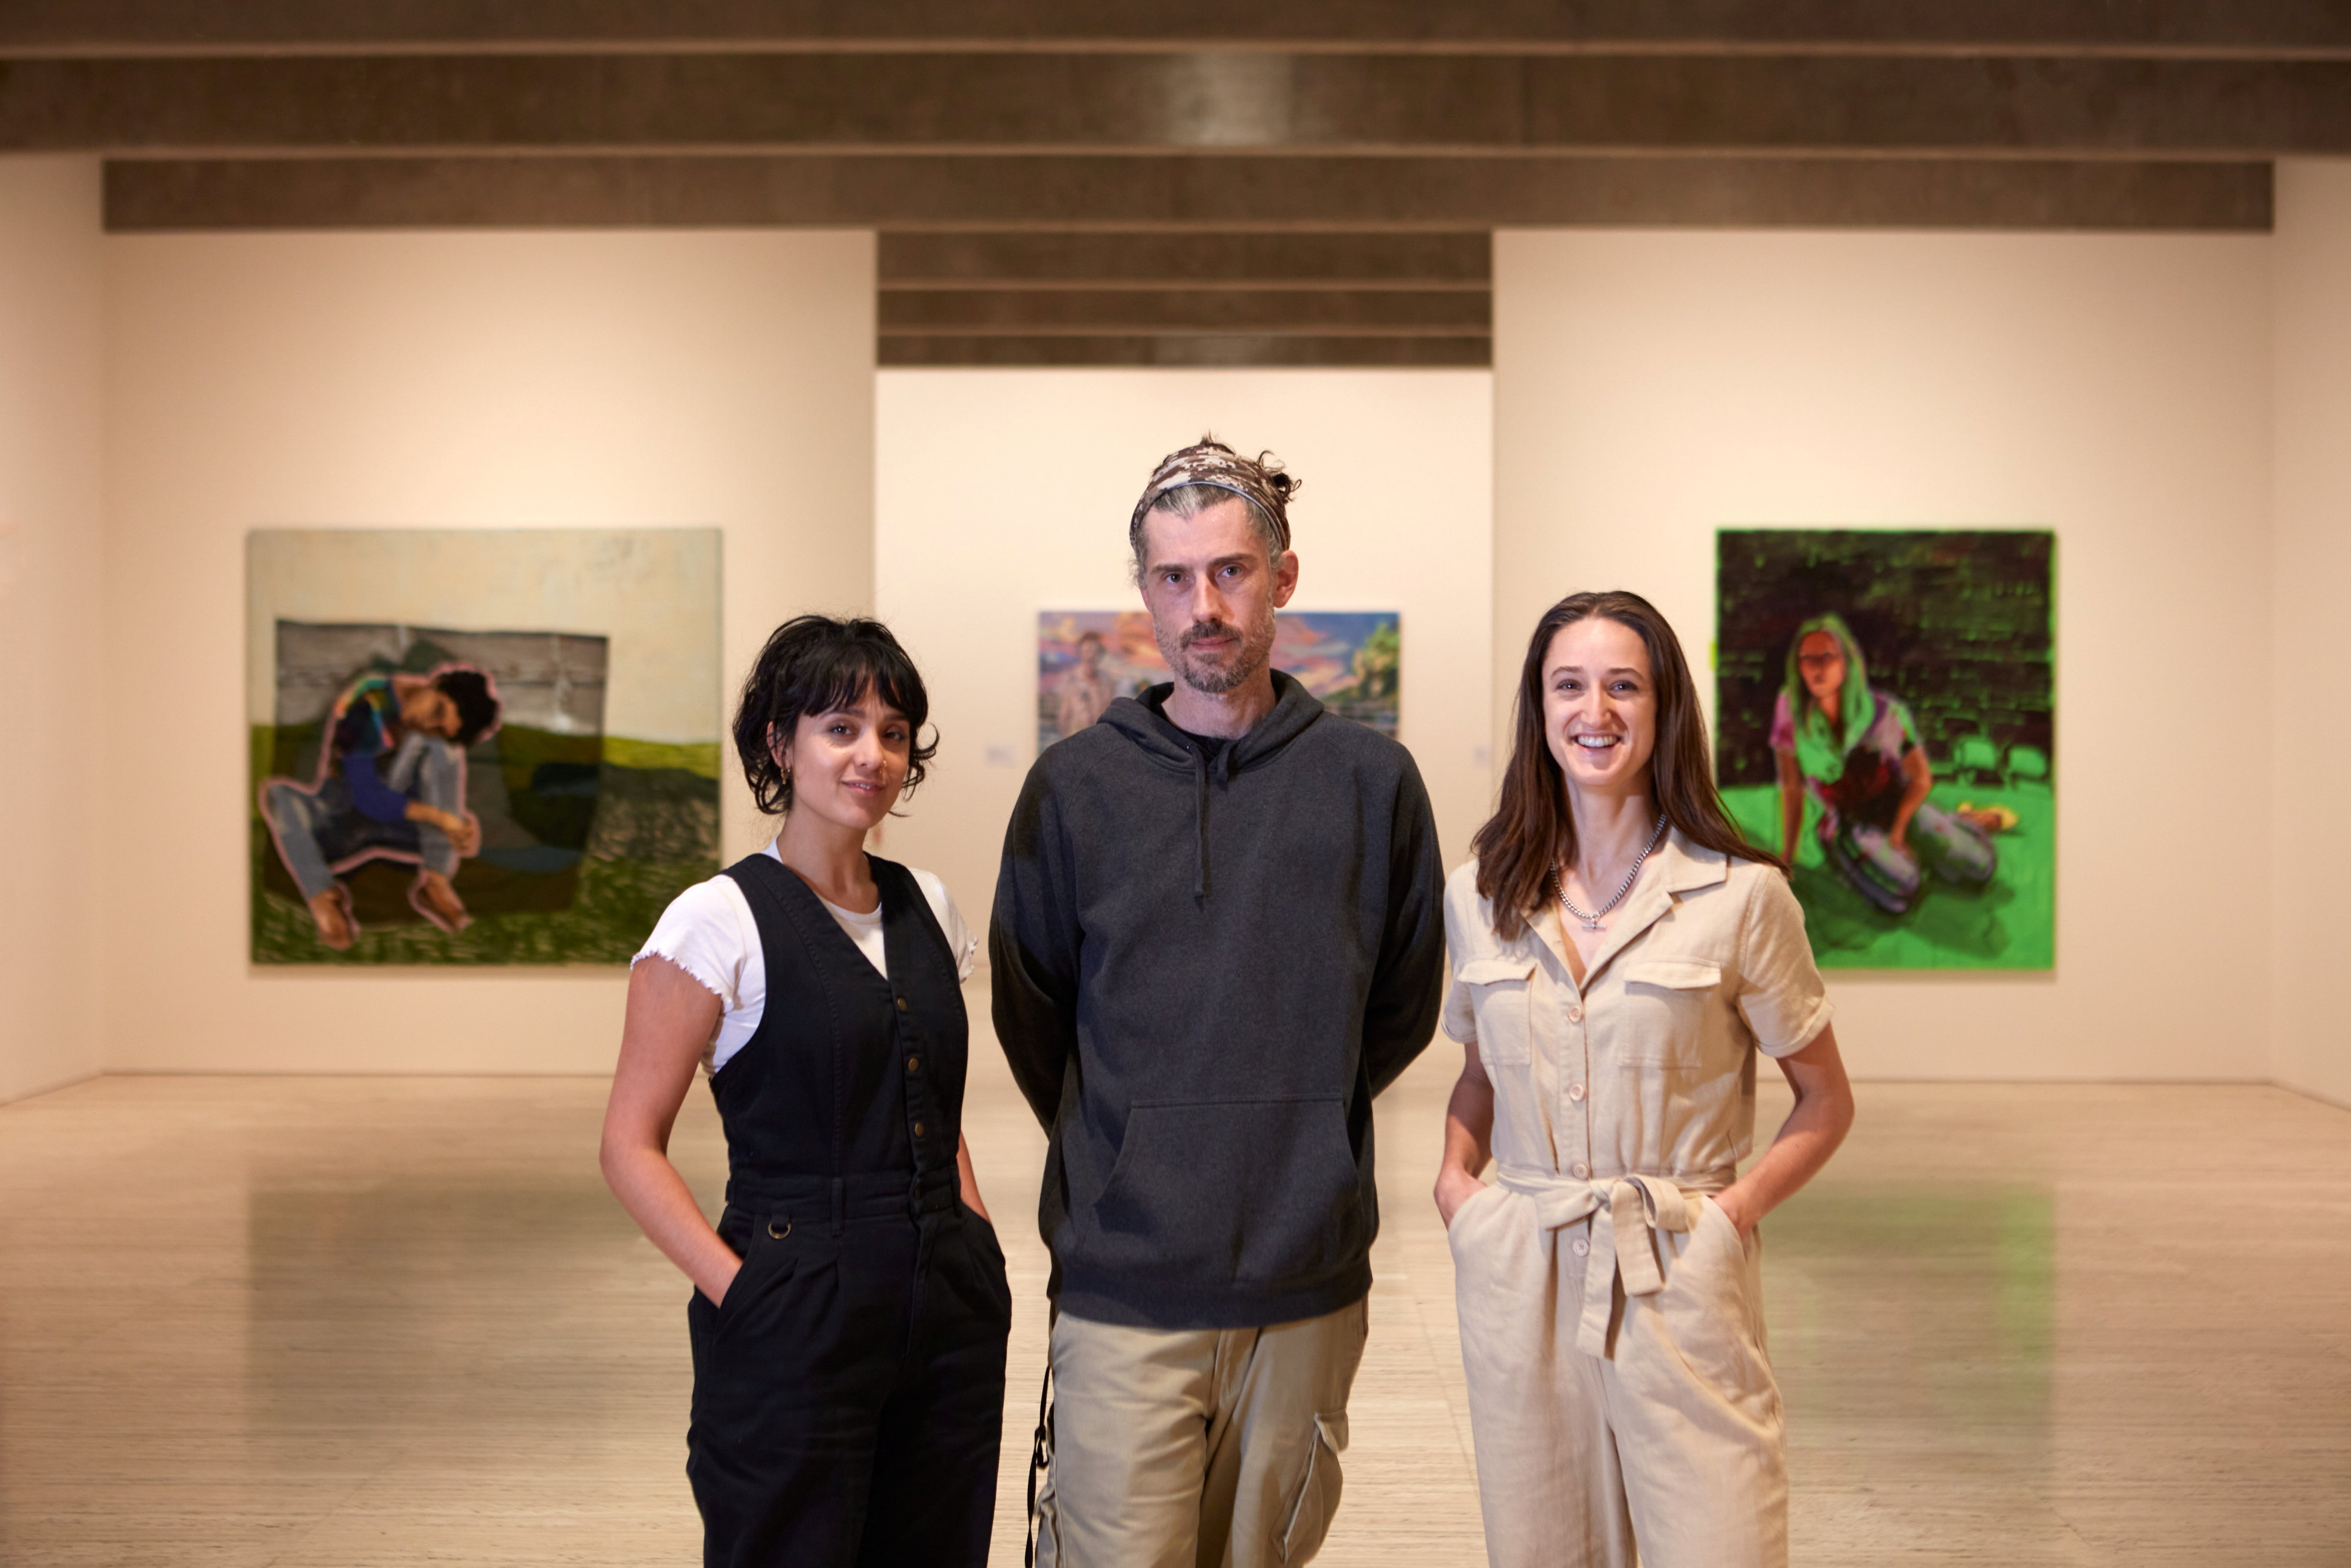 Two women and a man stand in front of portraits in an art gallery.